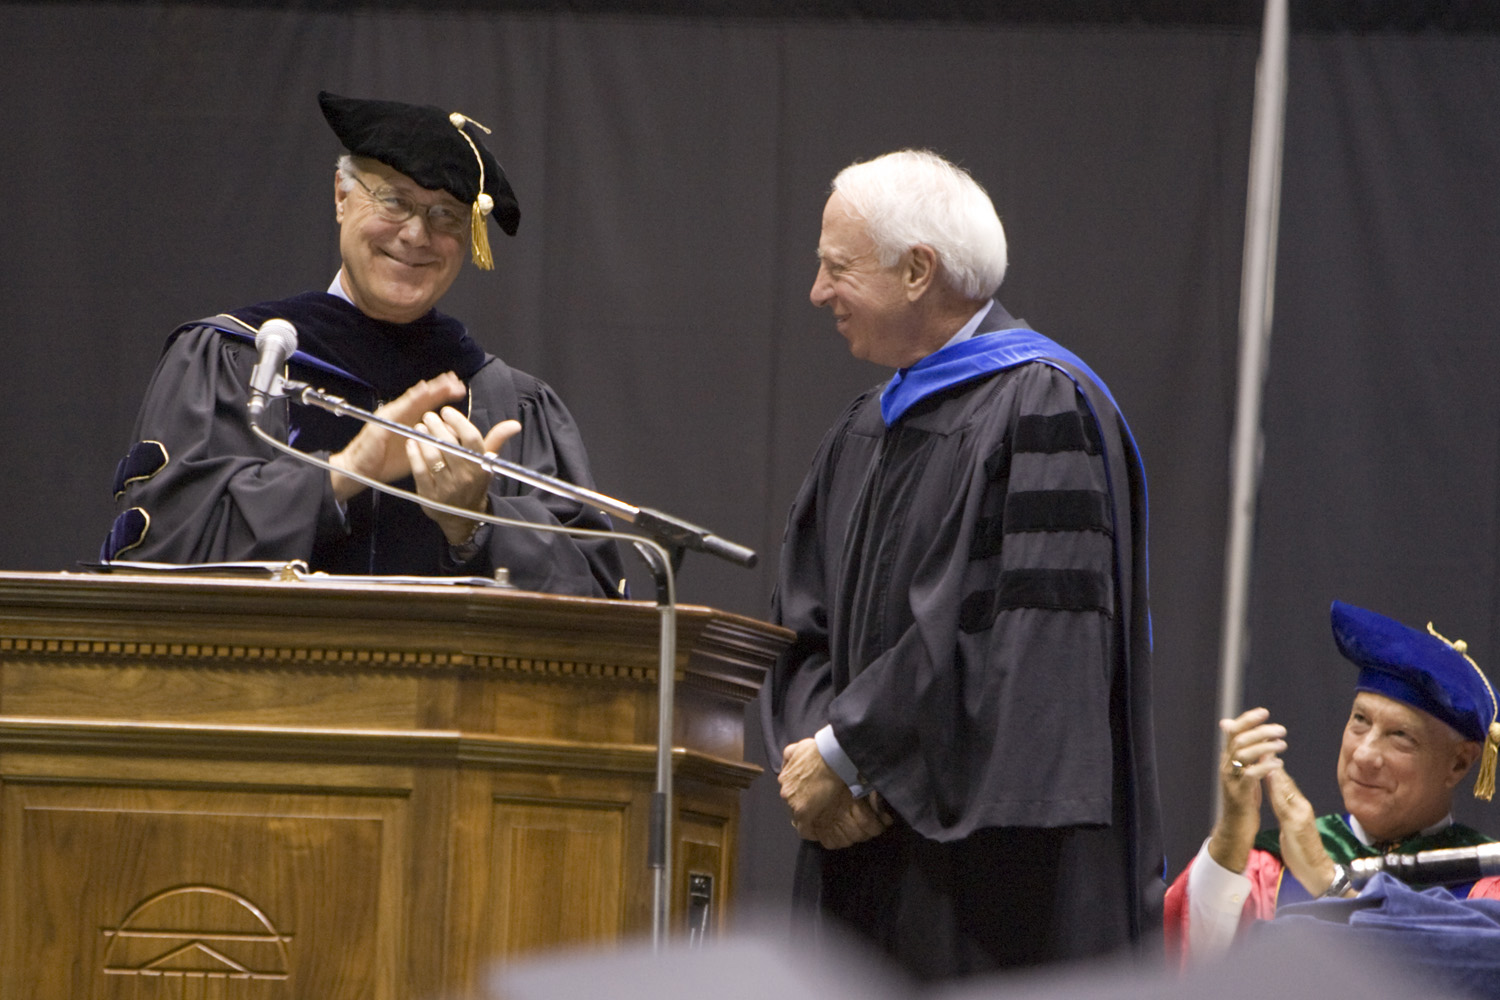 Richard Bonnie, right,  recieving an award while President Casteen claps on stage